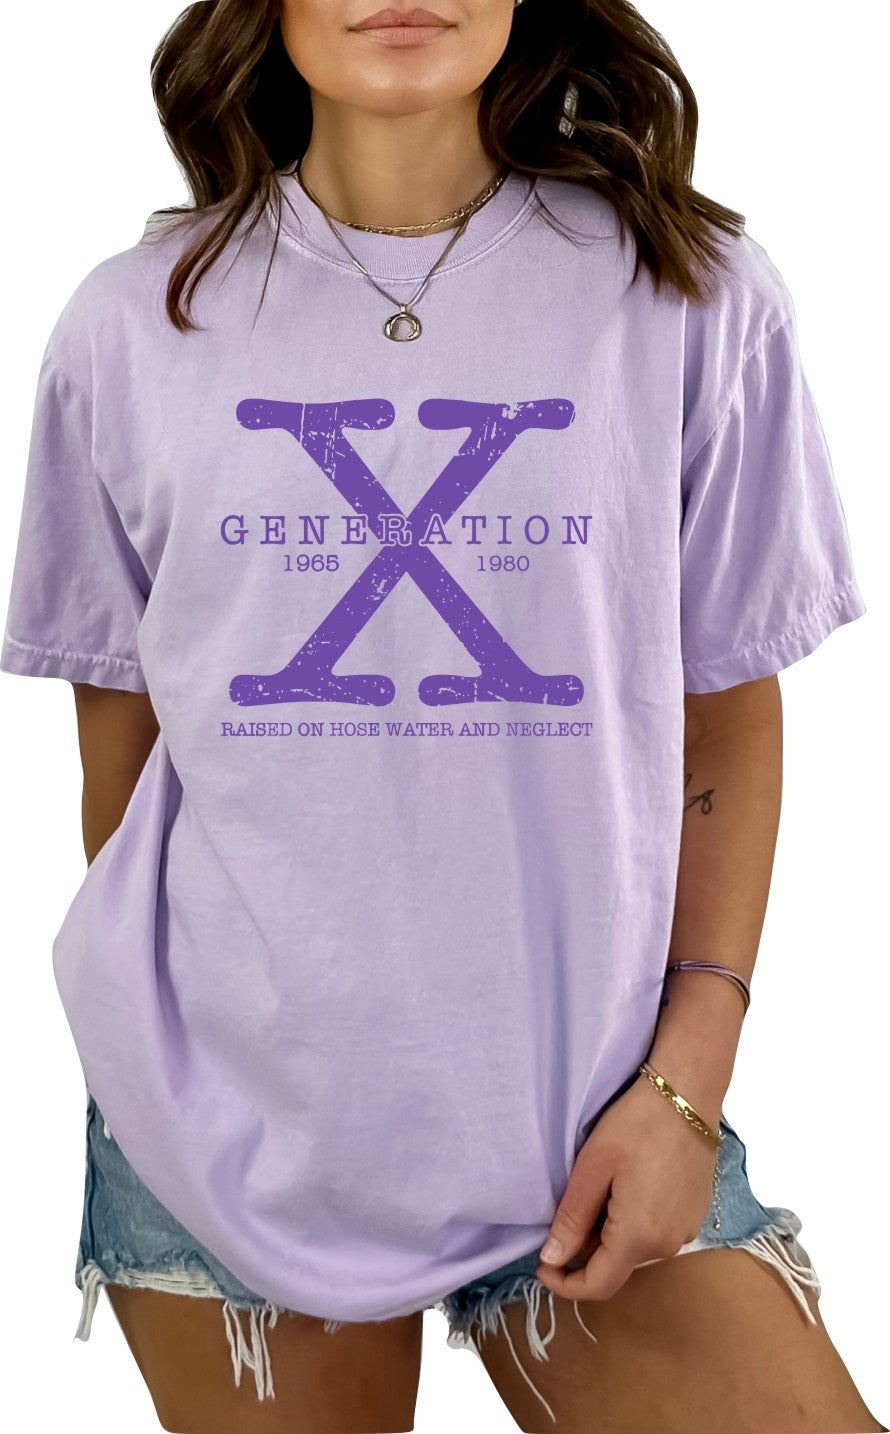 Generation X Colors Women's T-Shirt Raised on Hose Water and Neglect